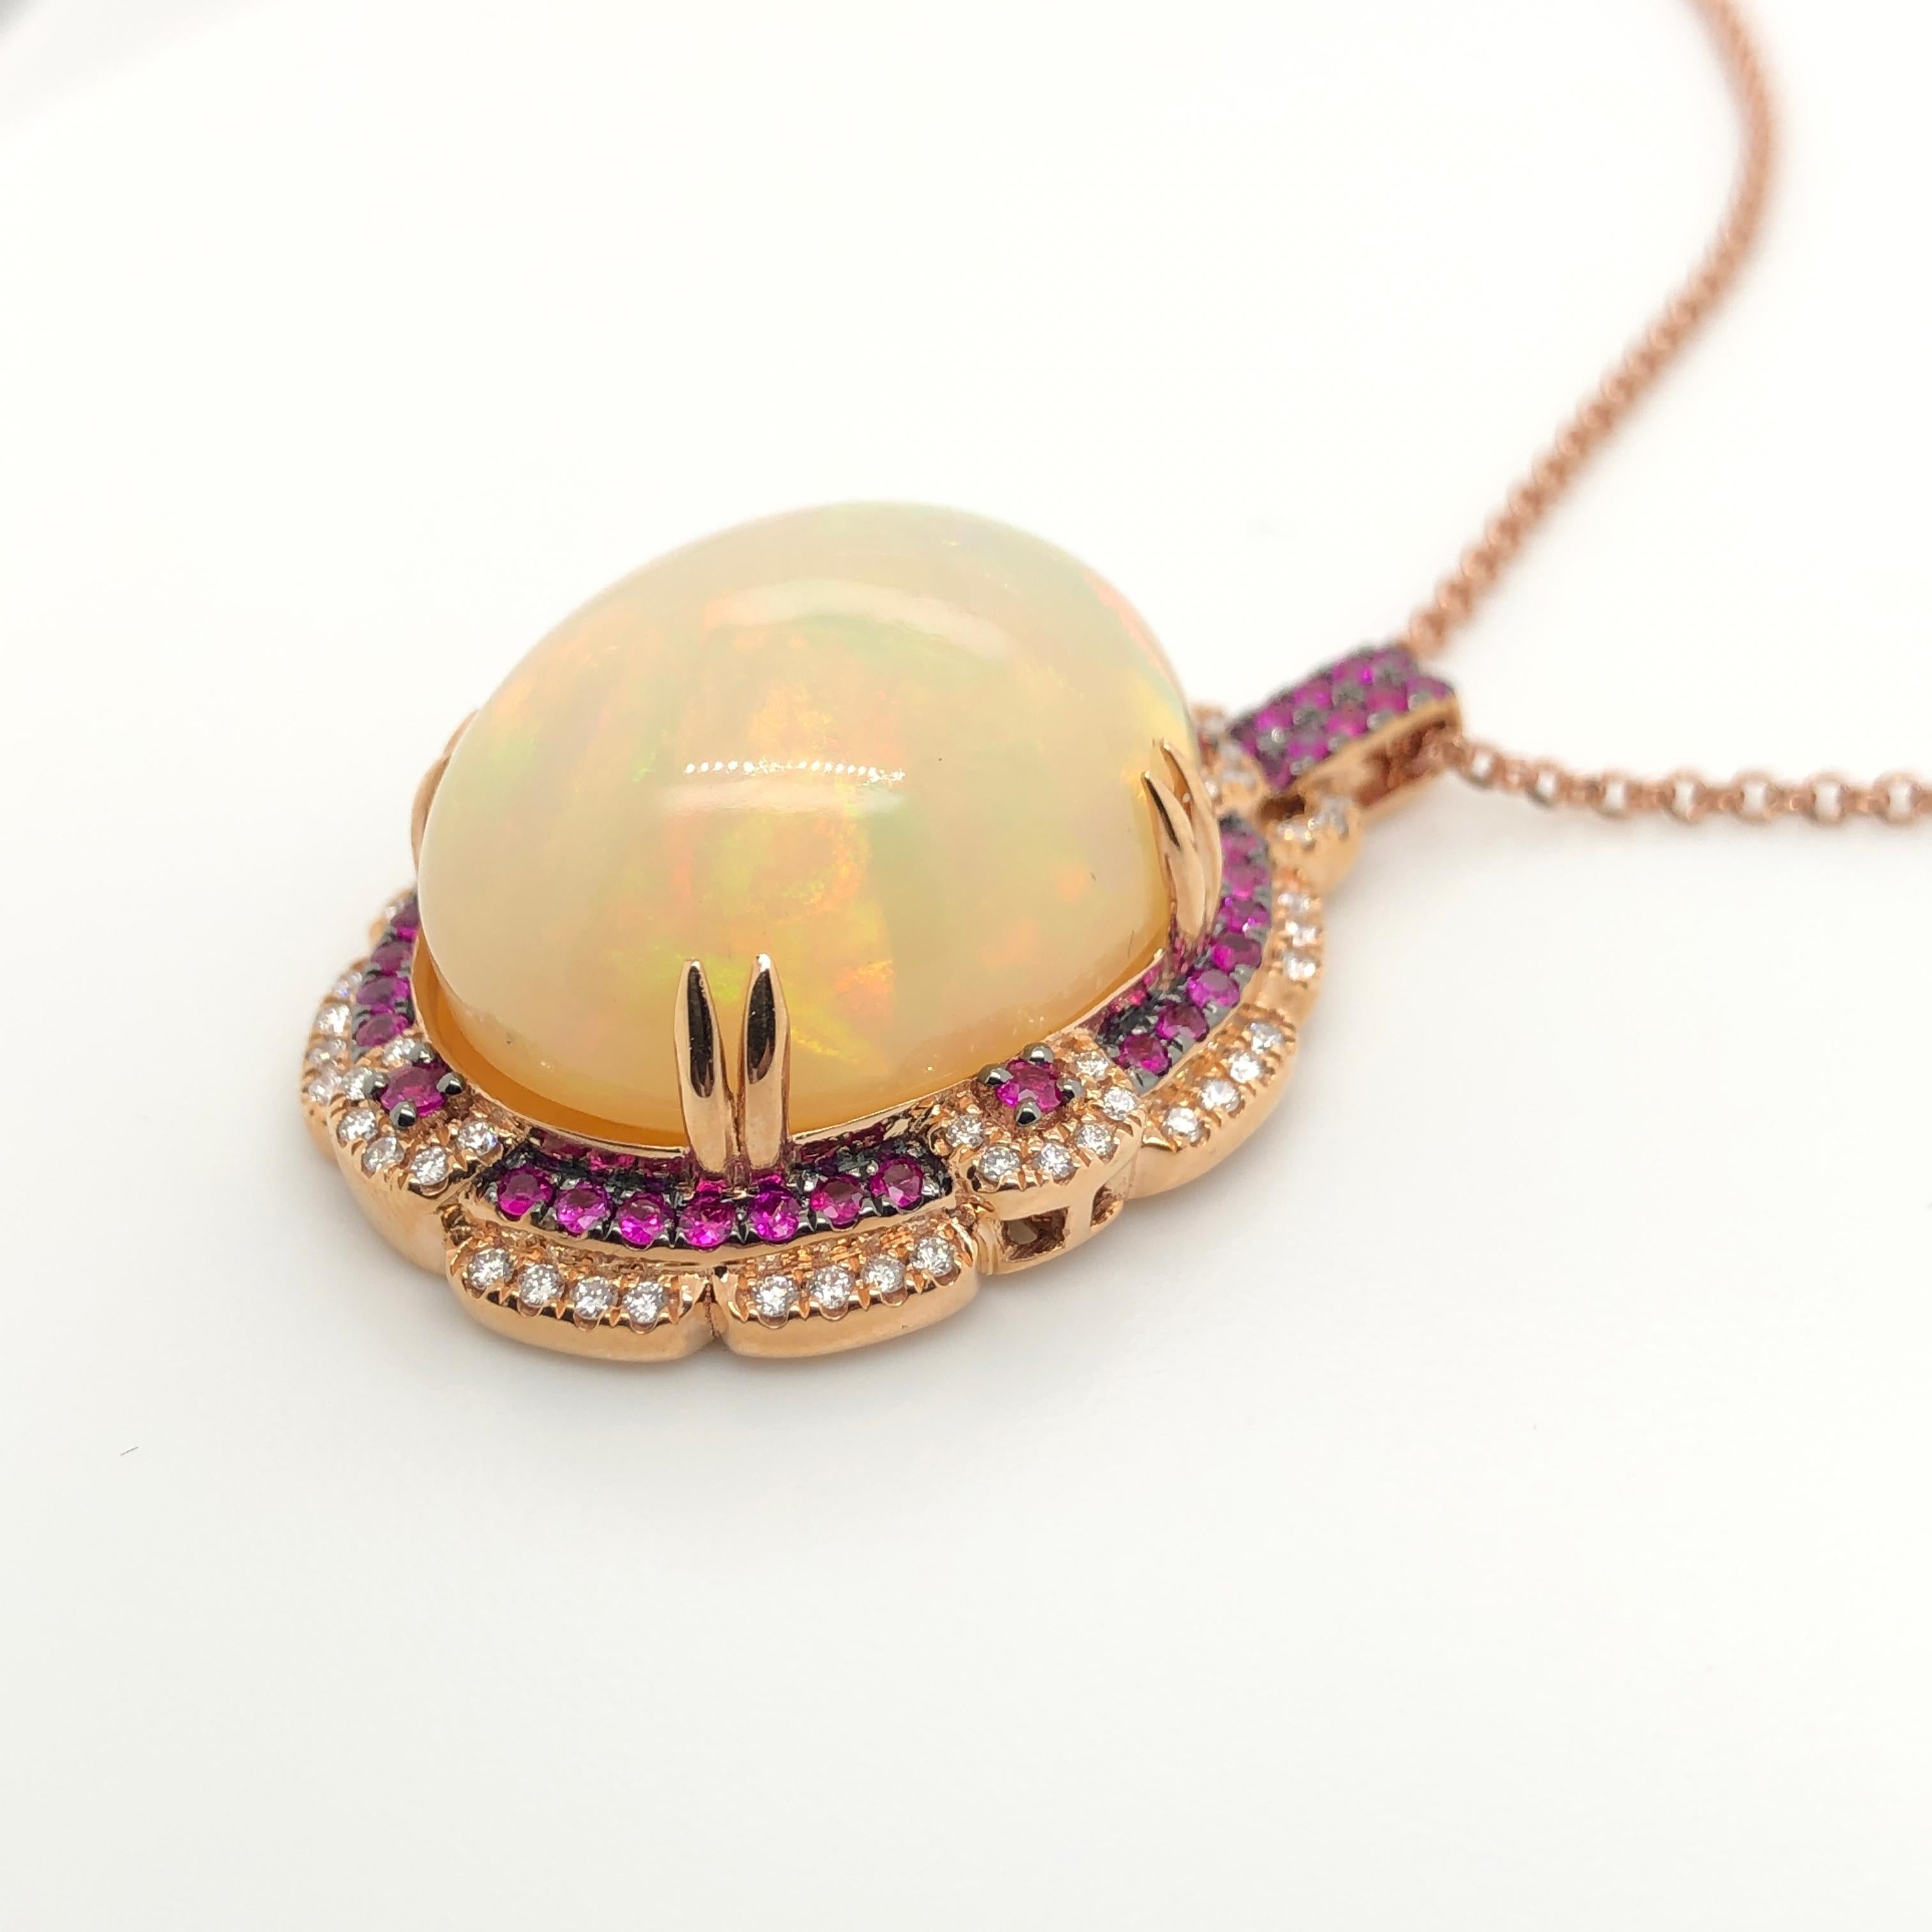 Bring out your passion for jewelry with this 18K Strawberry Gold Le Vian Couture Pendant Necklace featuring a stunning 17 carat Neopolitan Opal surrounded by 1/2 ct. tw. Passion Ruby and  2/5 ct. t.w. Vanilla Diamonds and 1/5 ct Chocolate Diamond.  